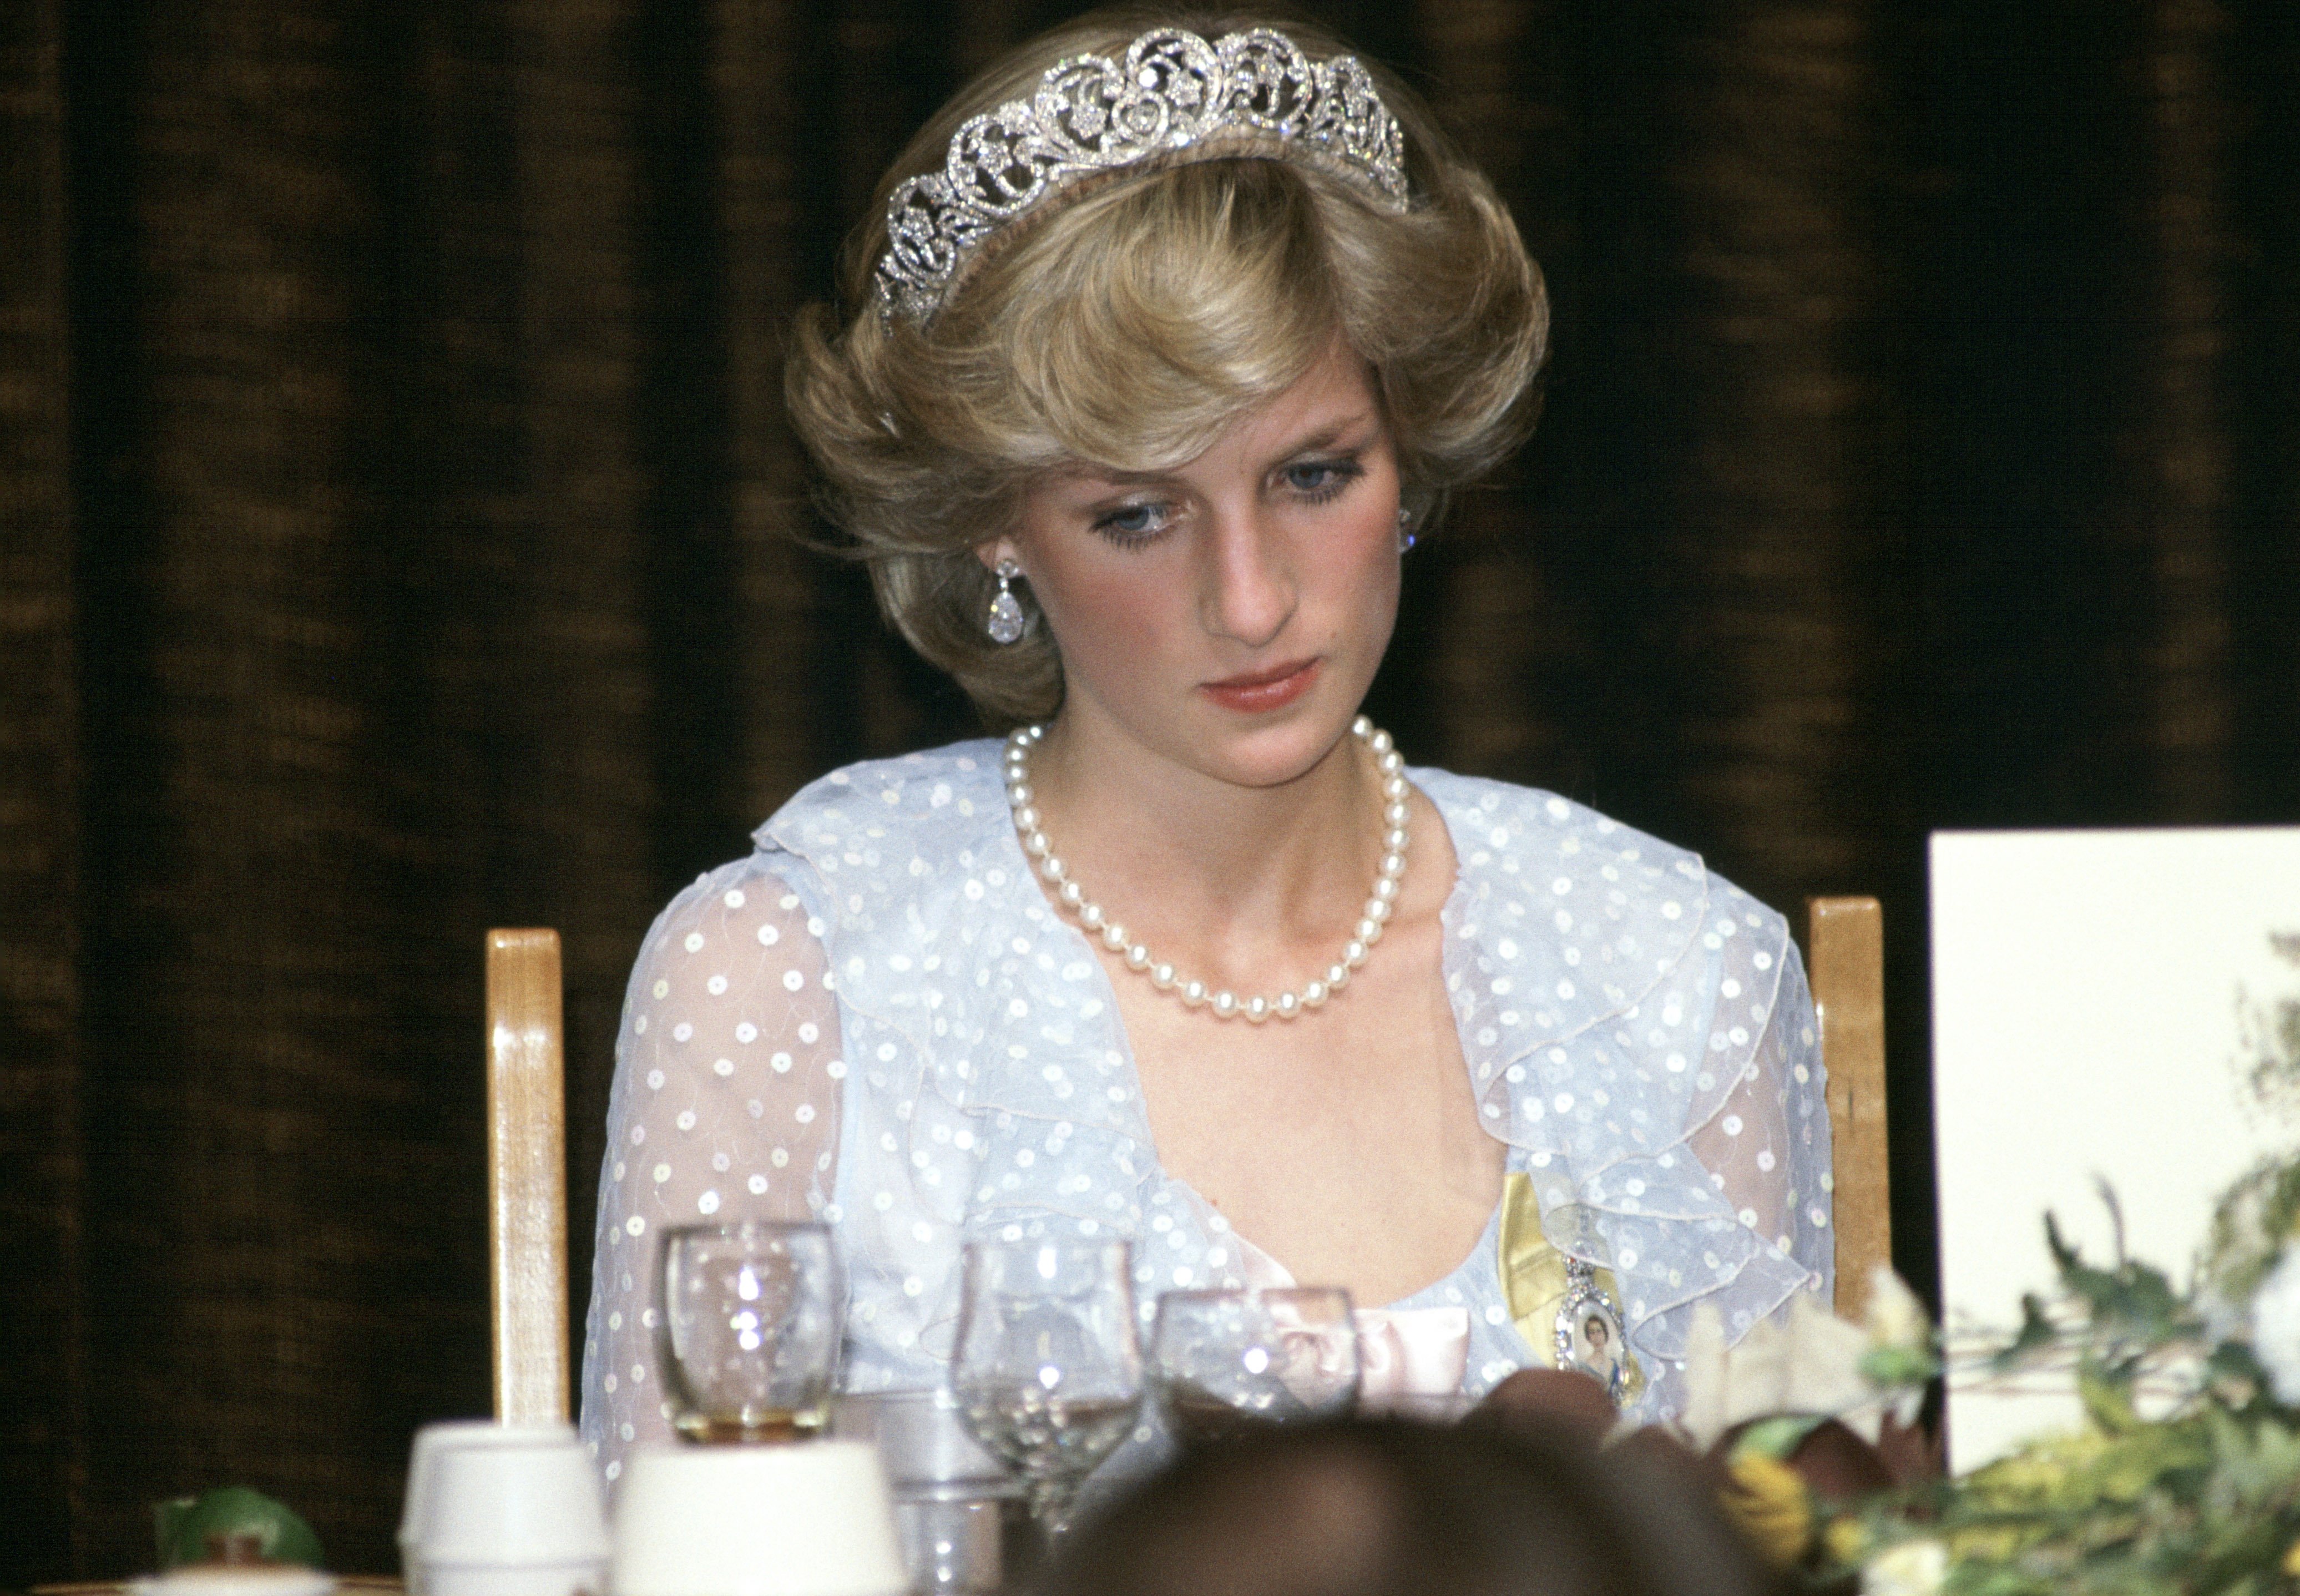 Princess Diana at a banquet in New Zealand wearing a blue chiffon evening dress designed by fashion designers David and Elizabeth Emanuel (the Emanuels) | Photo: Getty Images